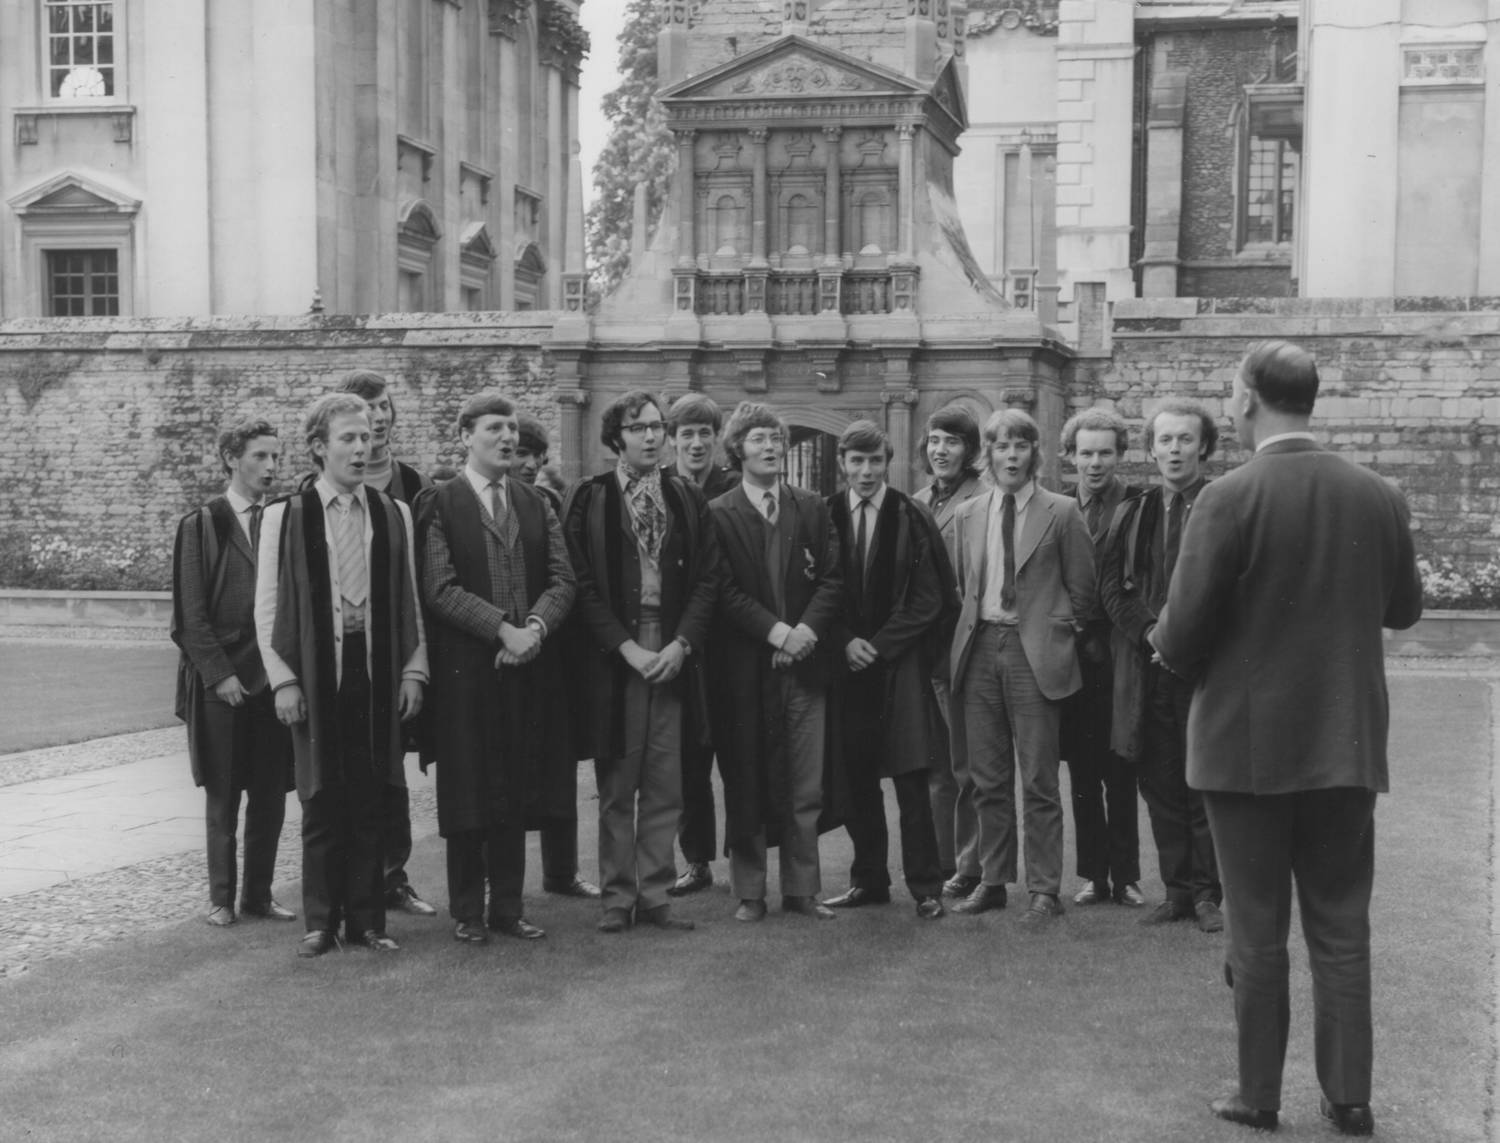 The Choir of Gonville & Caius College, with the Precentor Peter Tranchell, in Caius Court, 1971